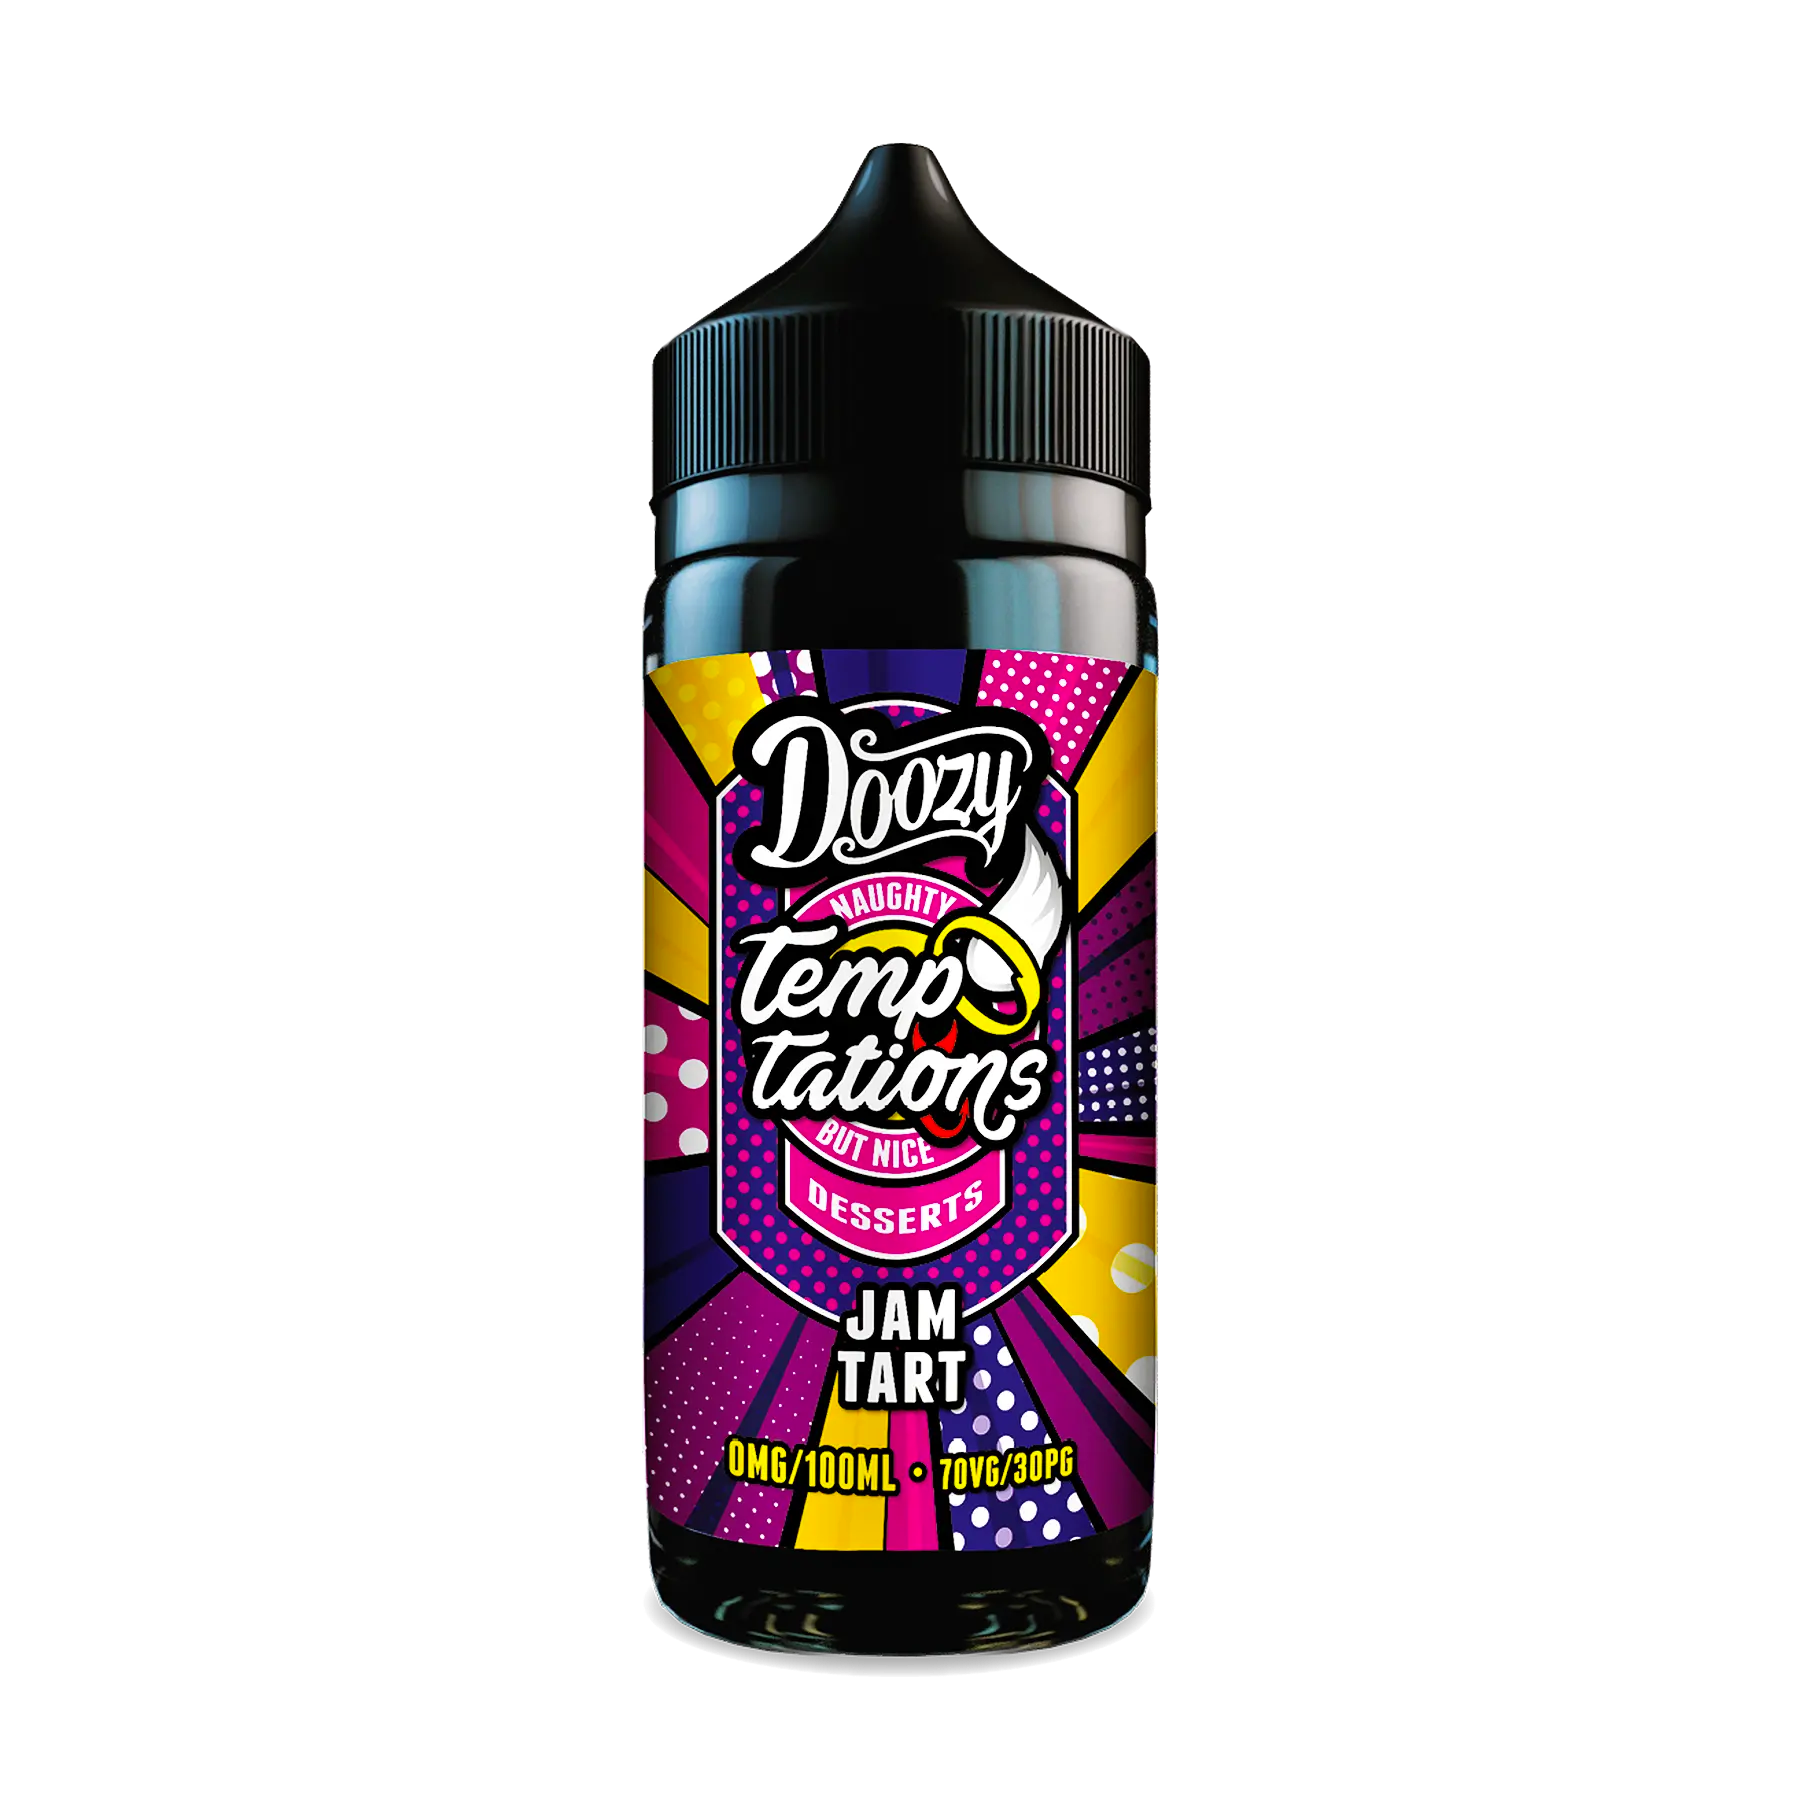 Jam Tart shortfill by Doozy Temptations recreates the flavour of a classic dessert with rich pastry and the sweet, tart taste of strawberry jam for fruity vape.